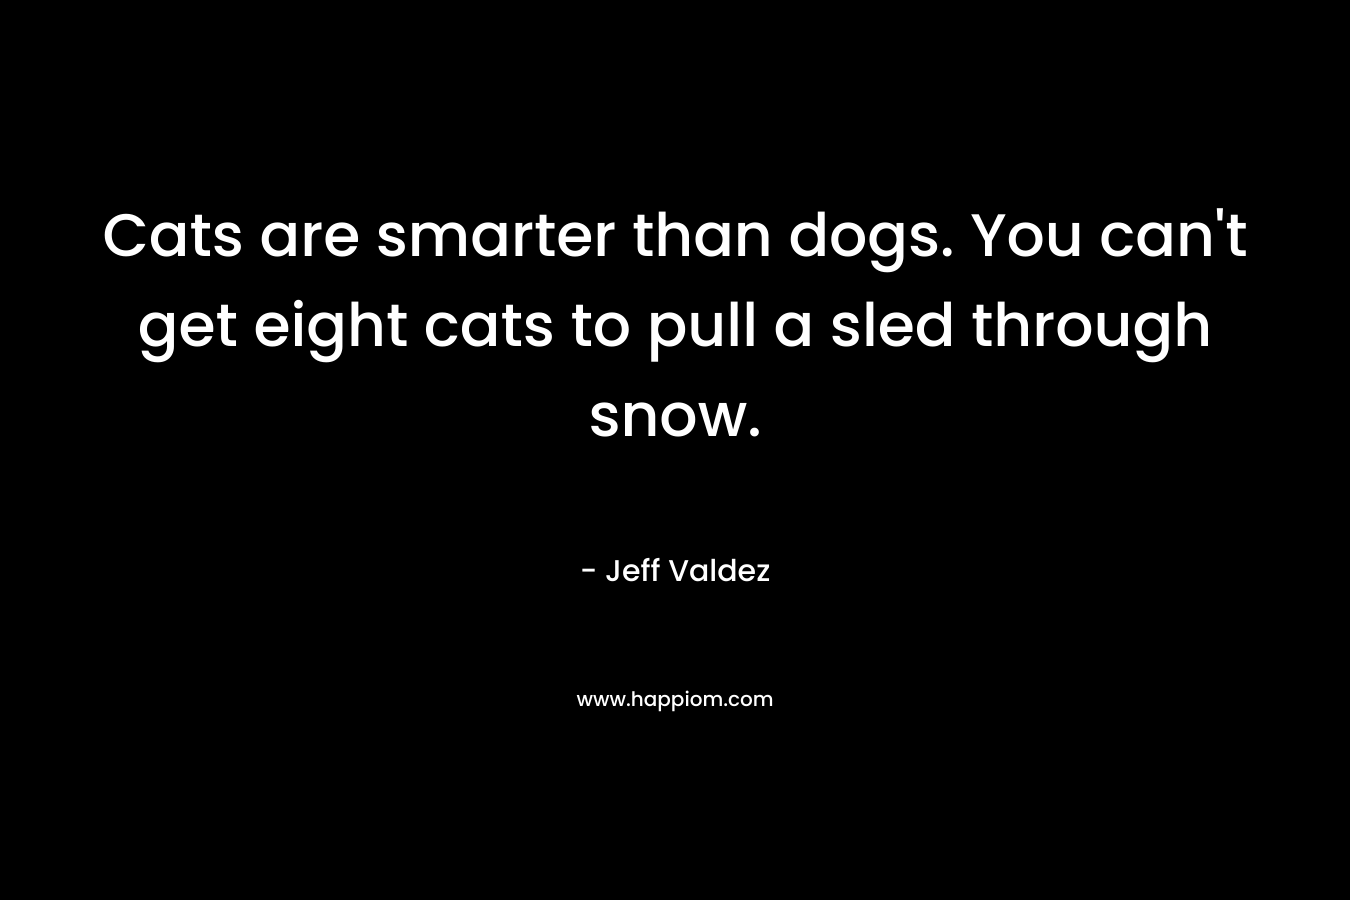 Cats are smarter than dogs. You can't get eight cats to pull a sled through snow.